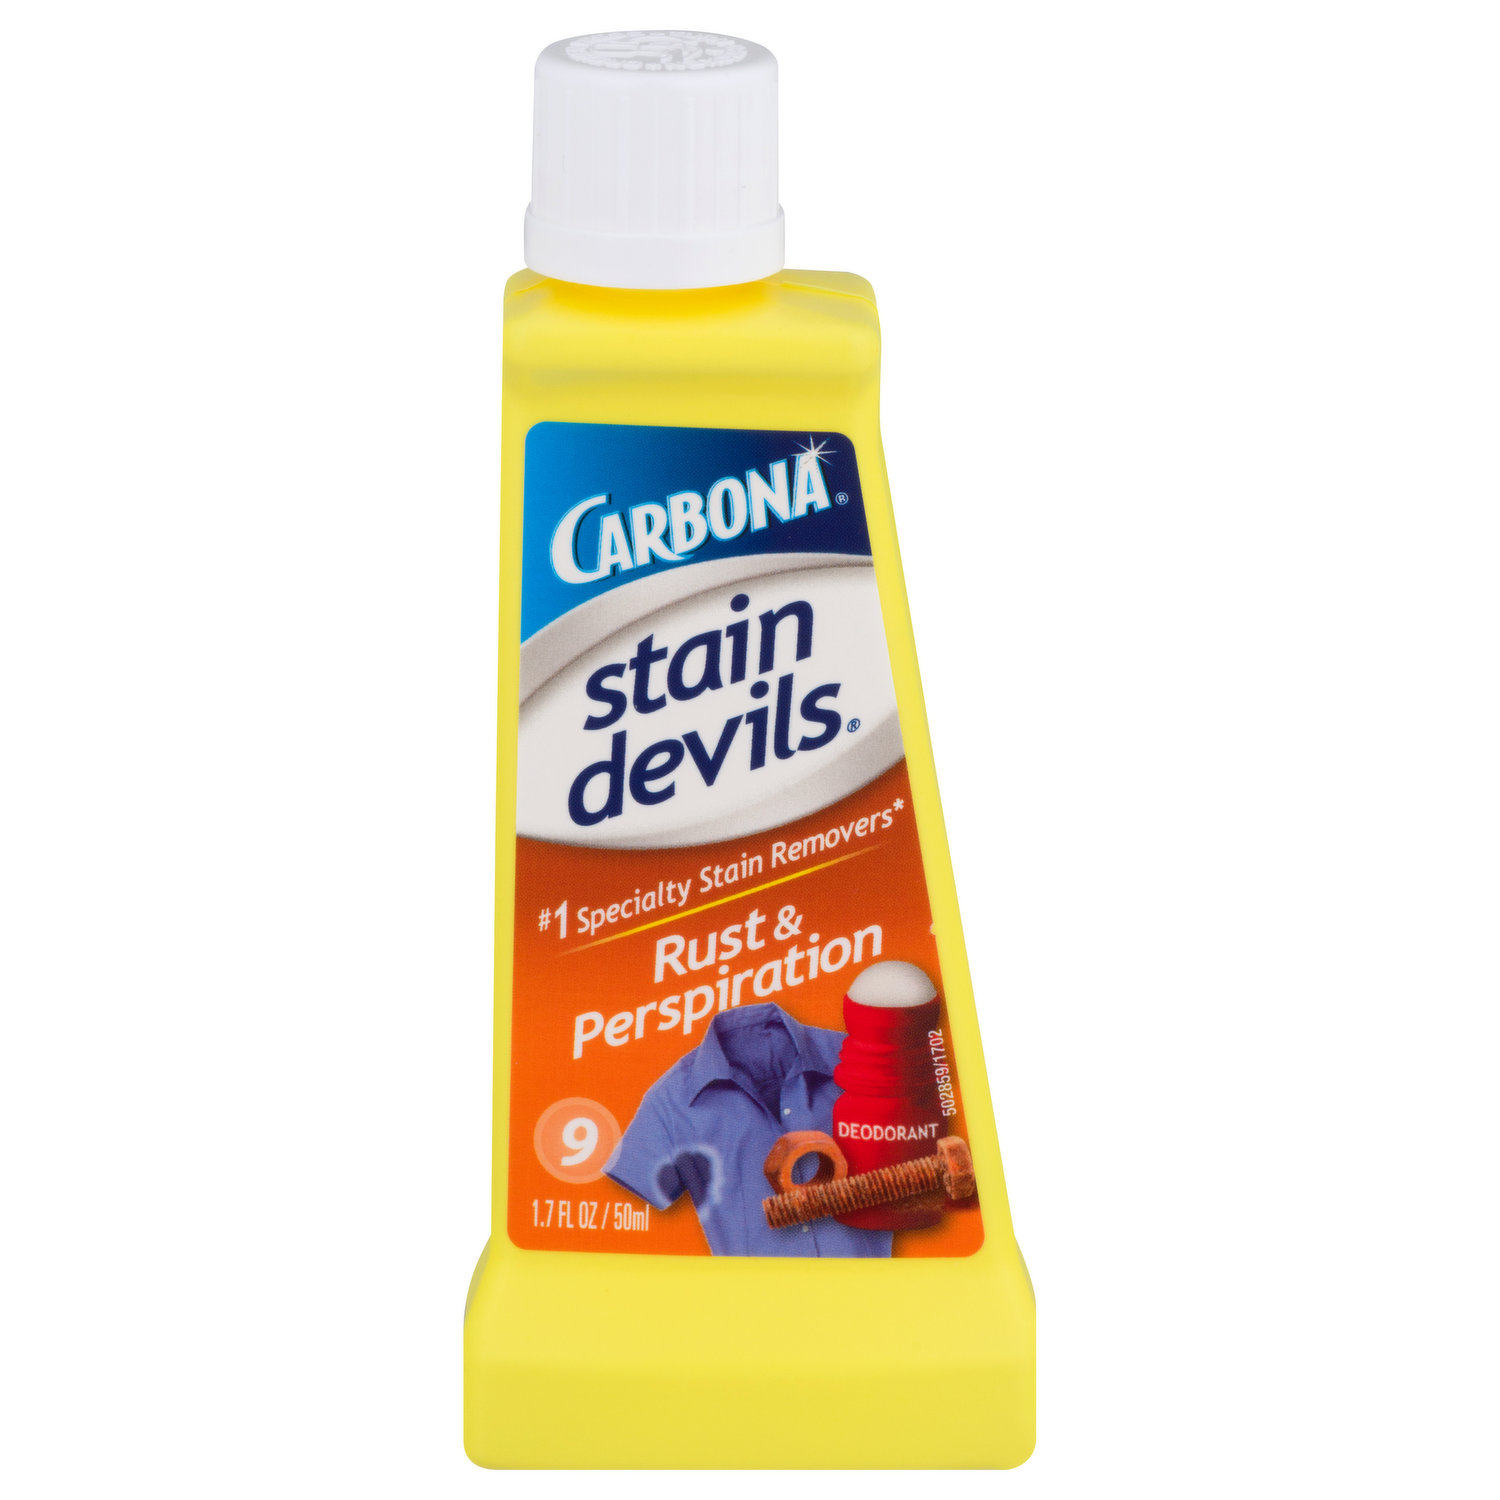 Carbona Stain Remover, 9 (Rust & Perspiration)